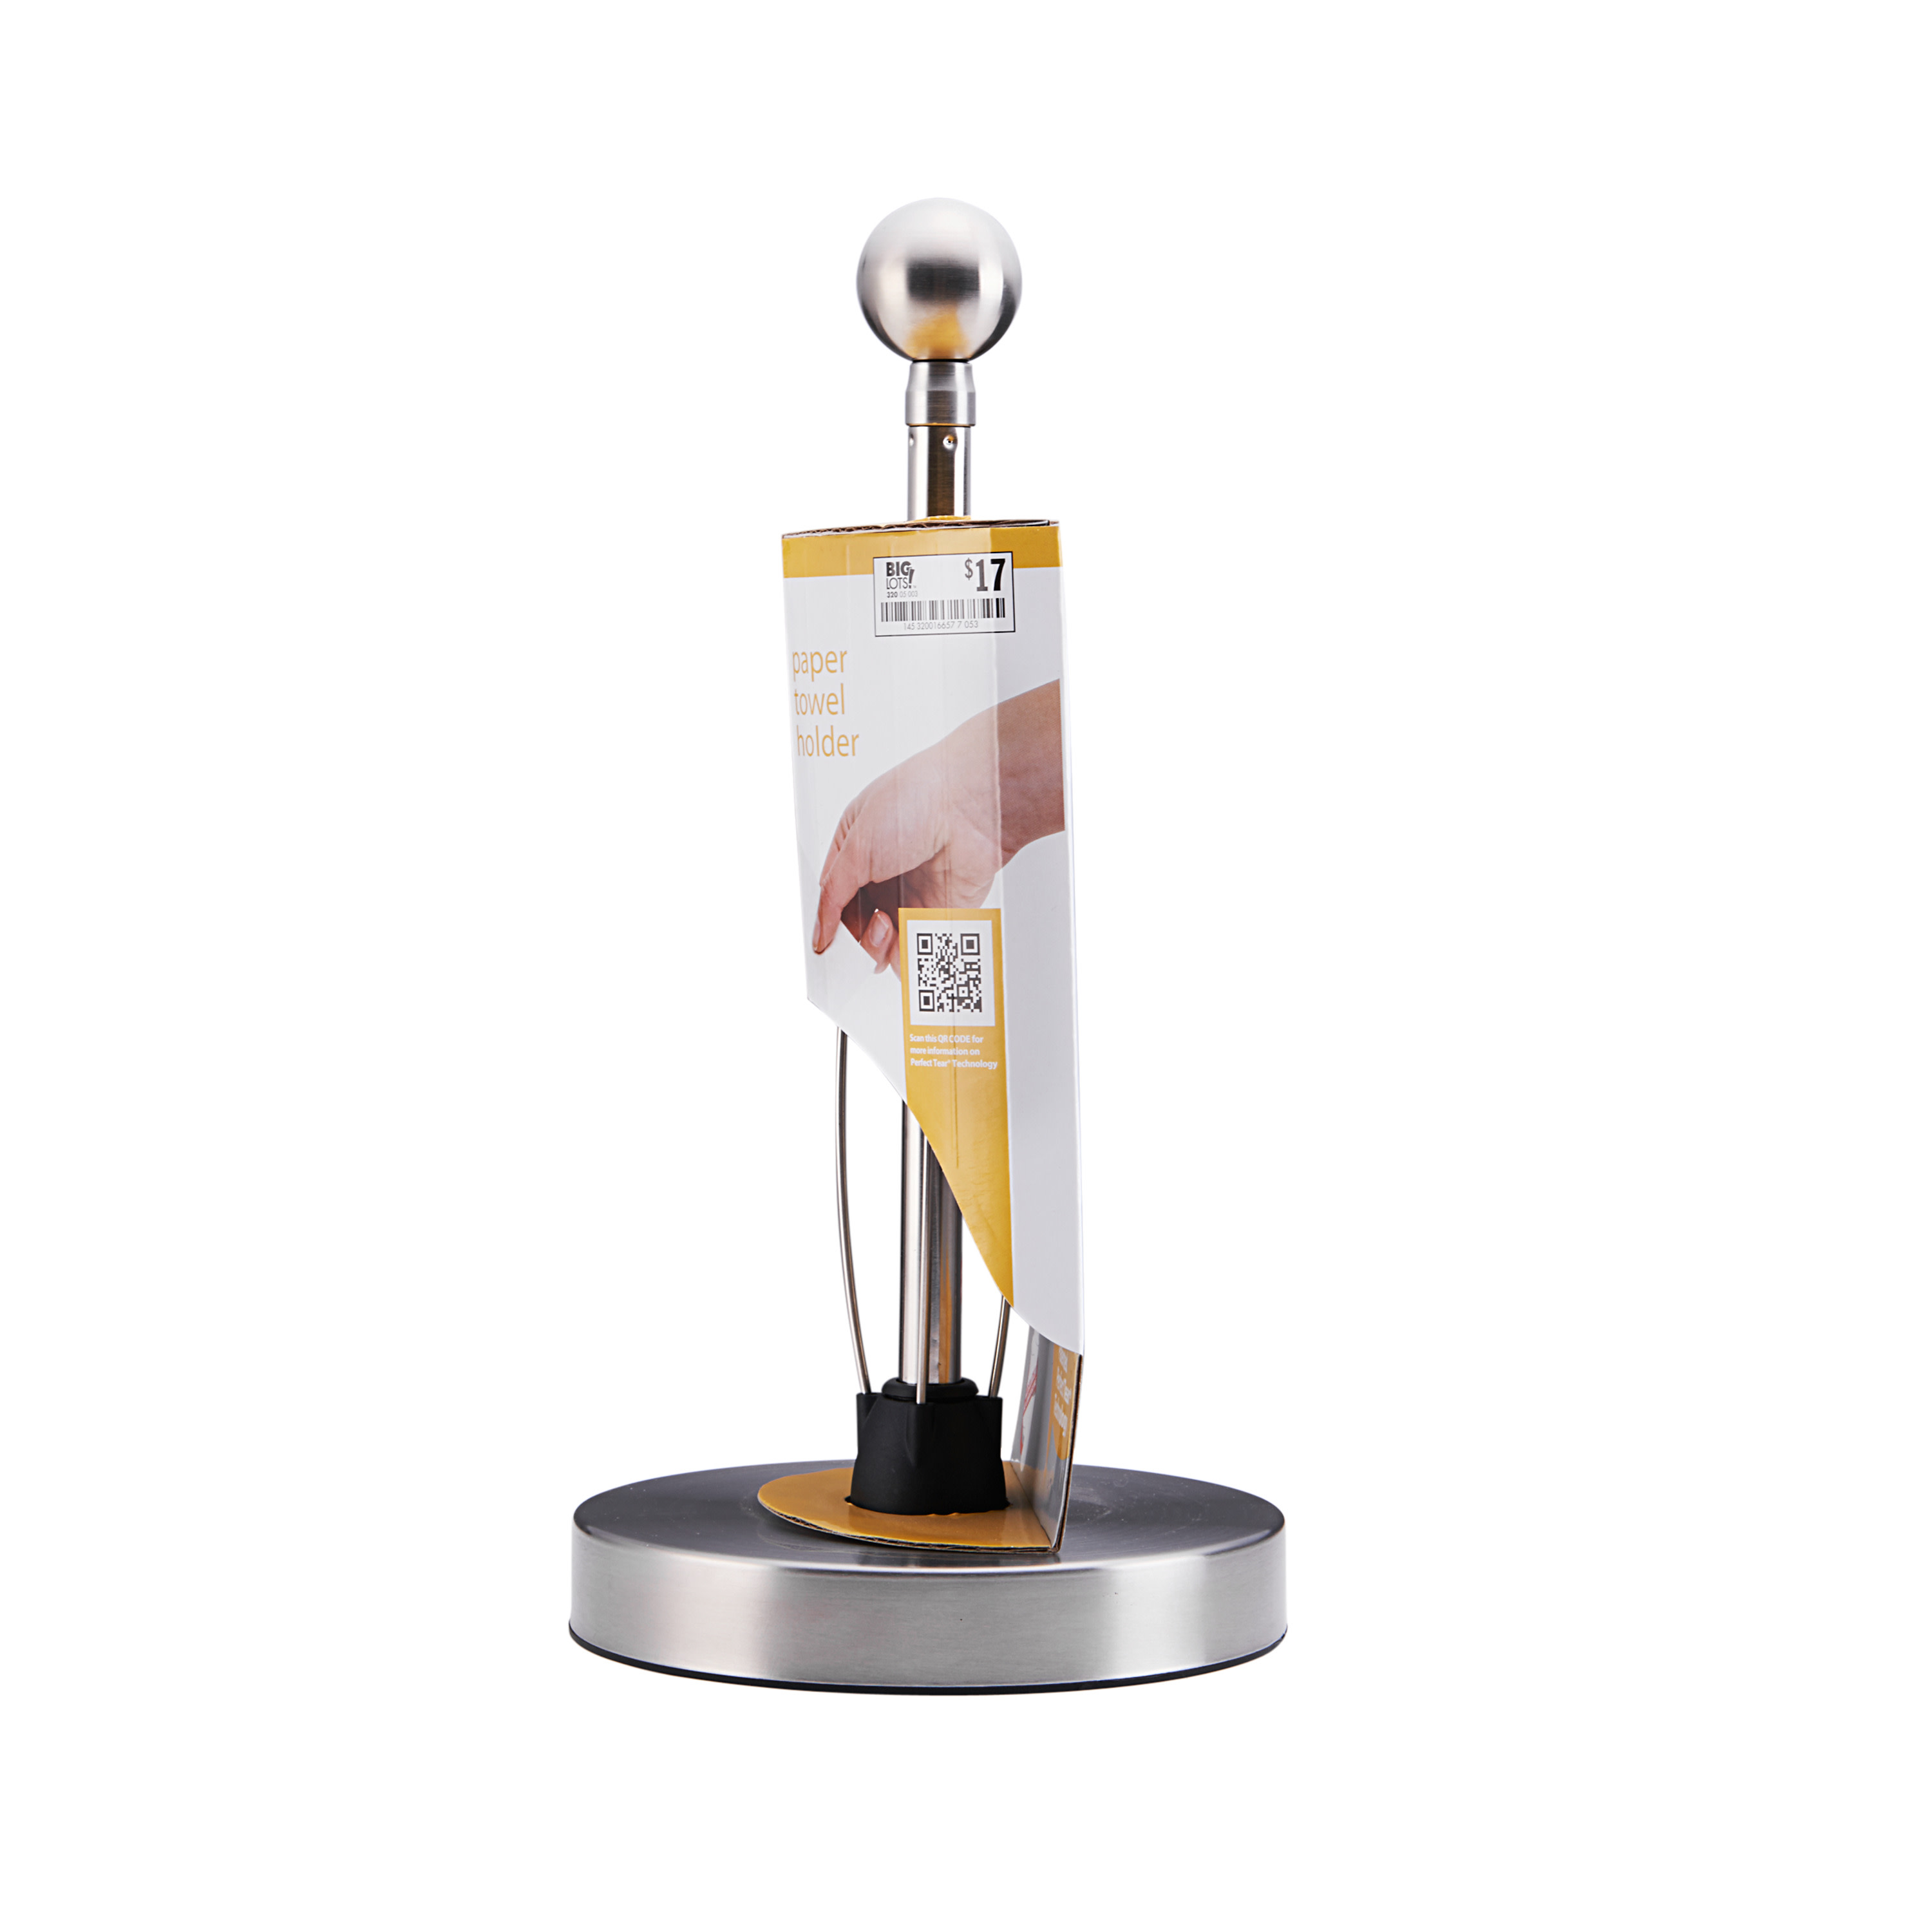 Kamenstein Ball Finial Perfect Tear Paper Towel Holder - image 5 of 7